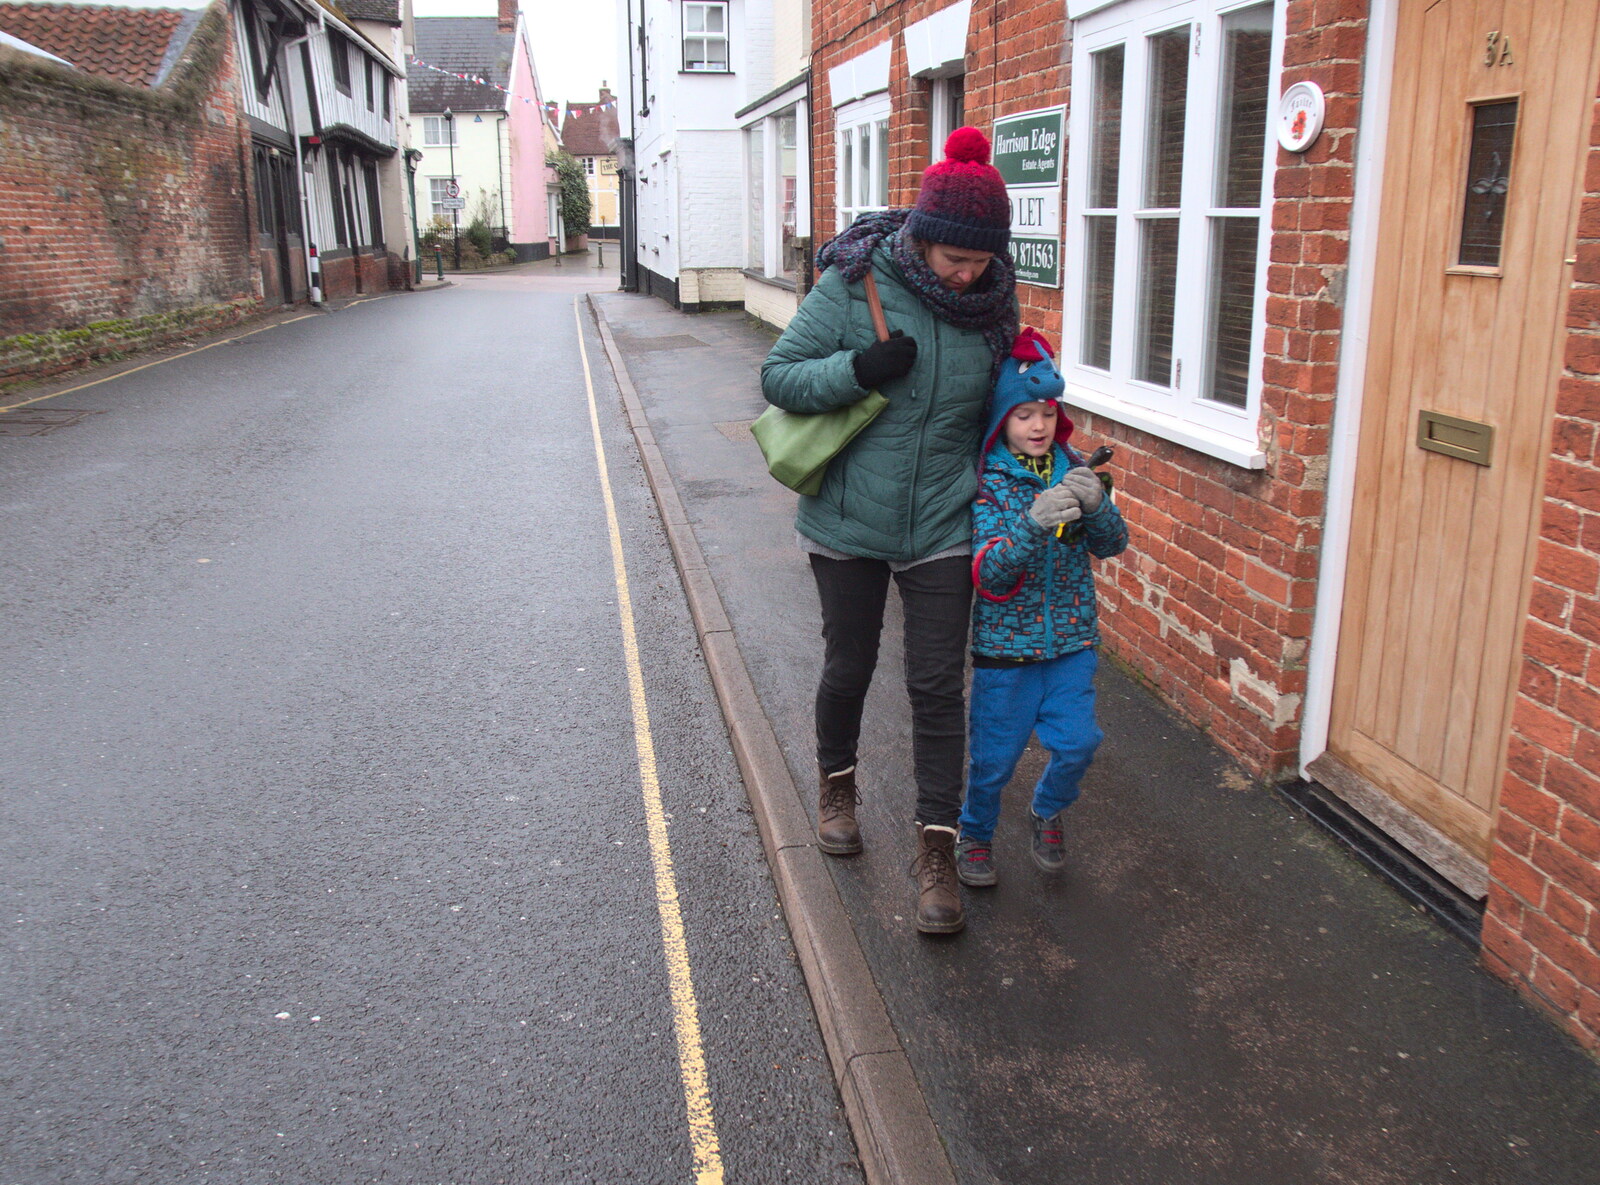 Isobel and Harry on Church Street in Eye from Quizzes and Library Books: a February Miscellany, Diss and Eye - 10th February 2018